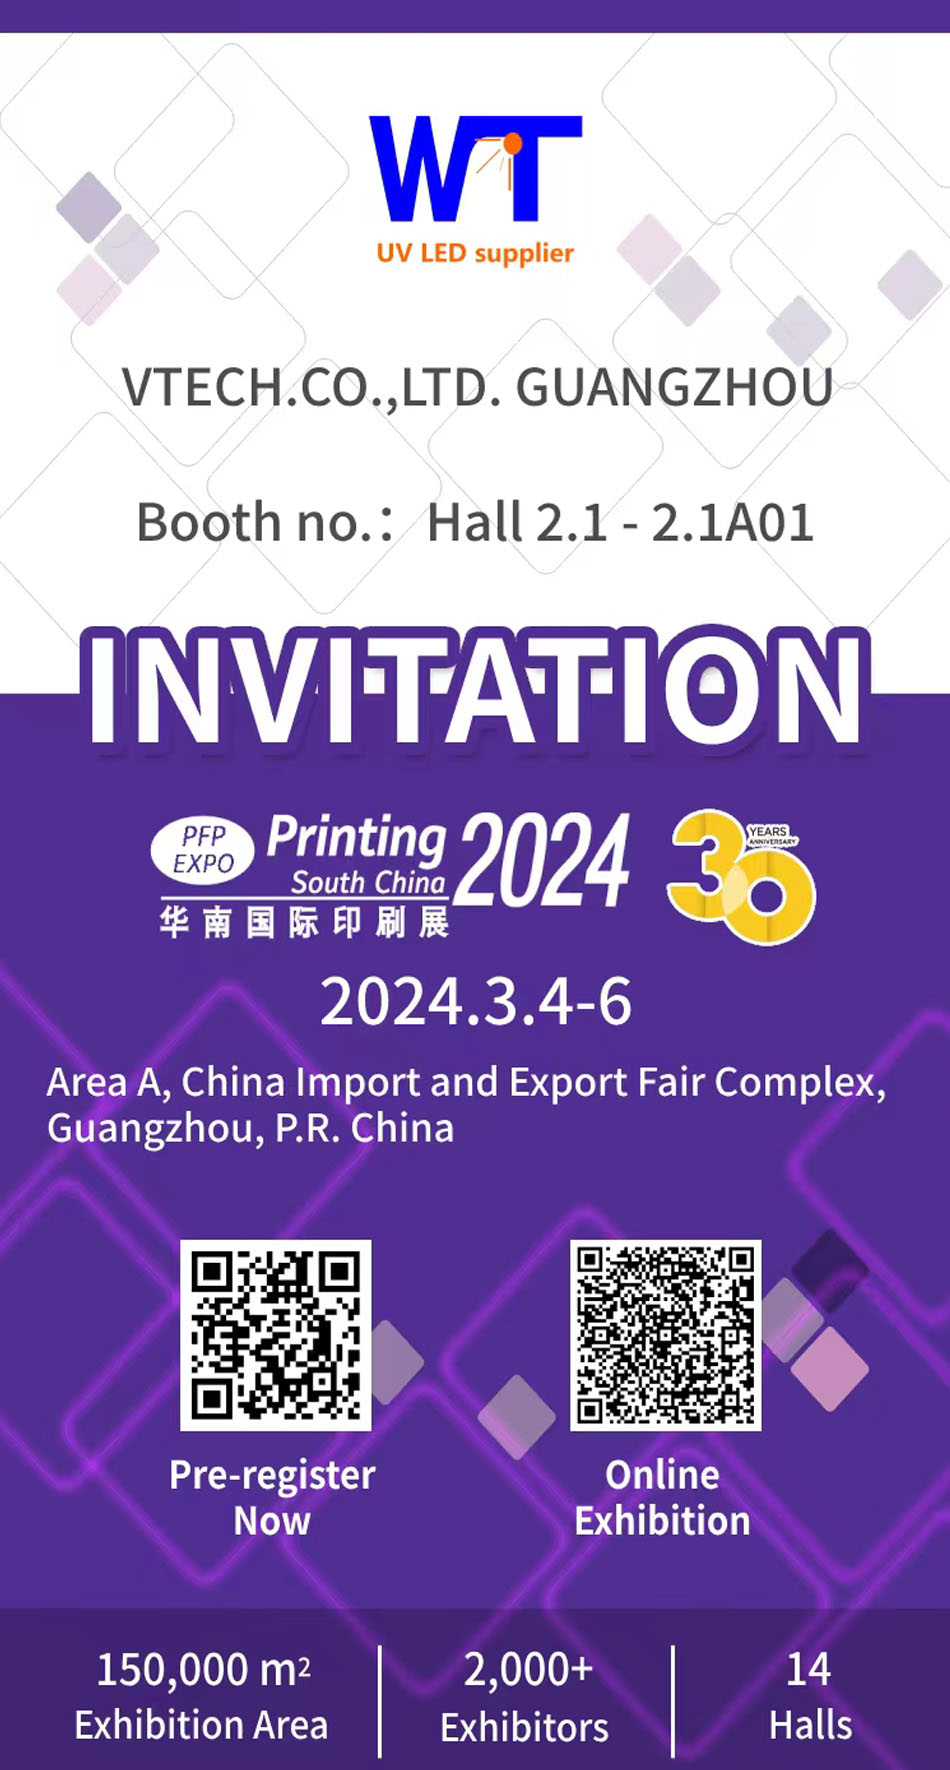 WT take part in South China International Printing Exhibition